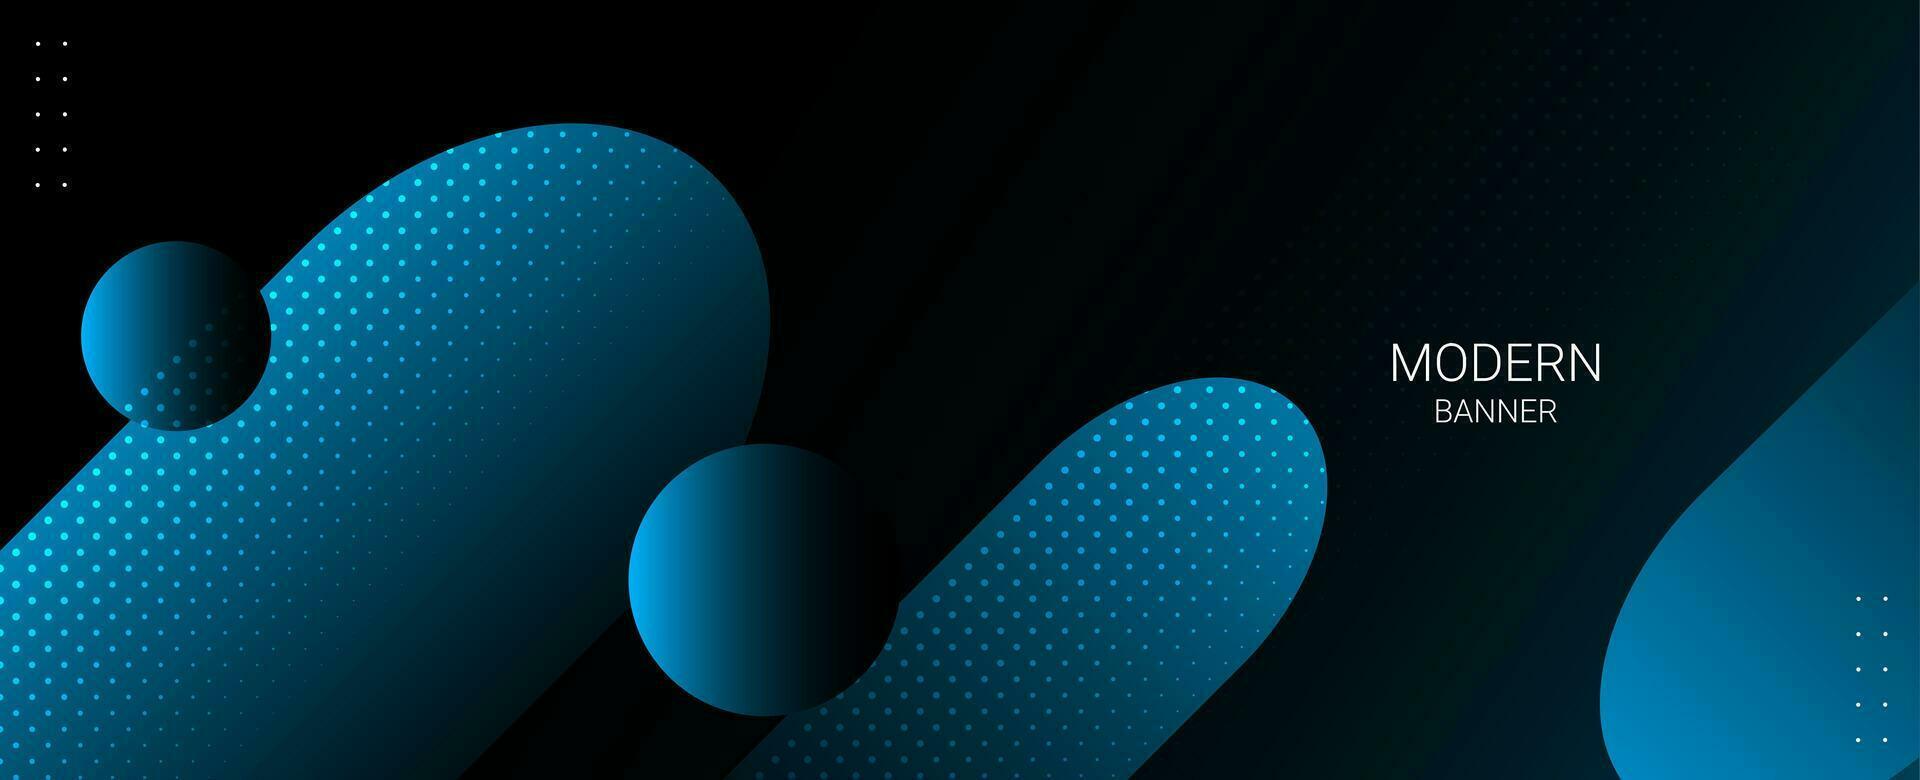 Abstract colorful vector design background